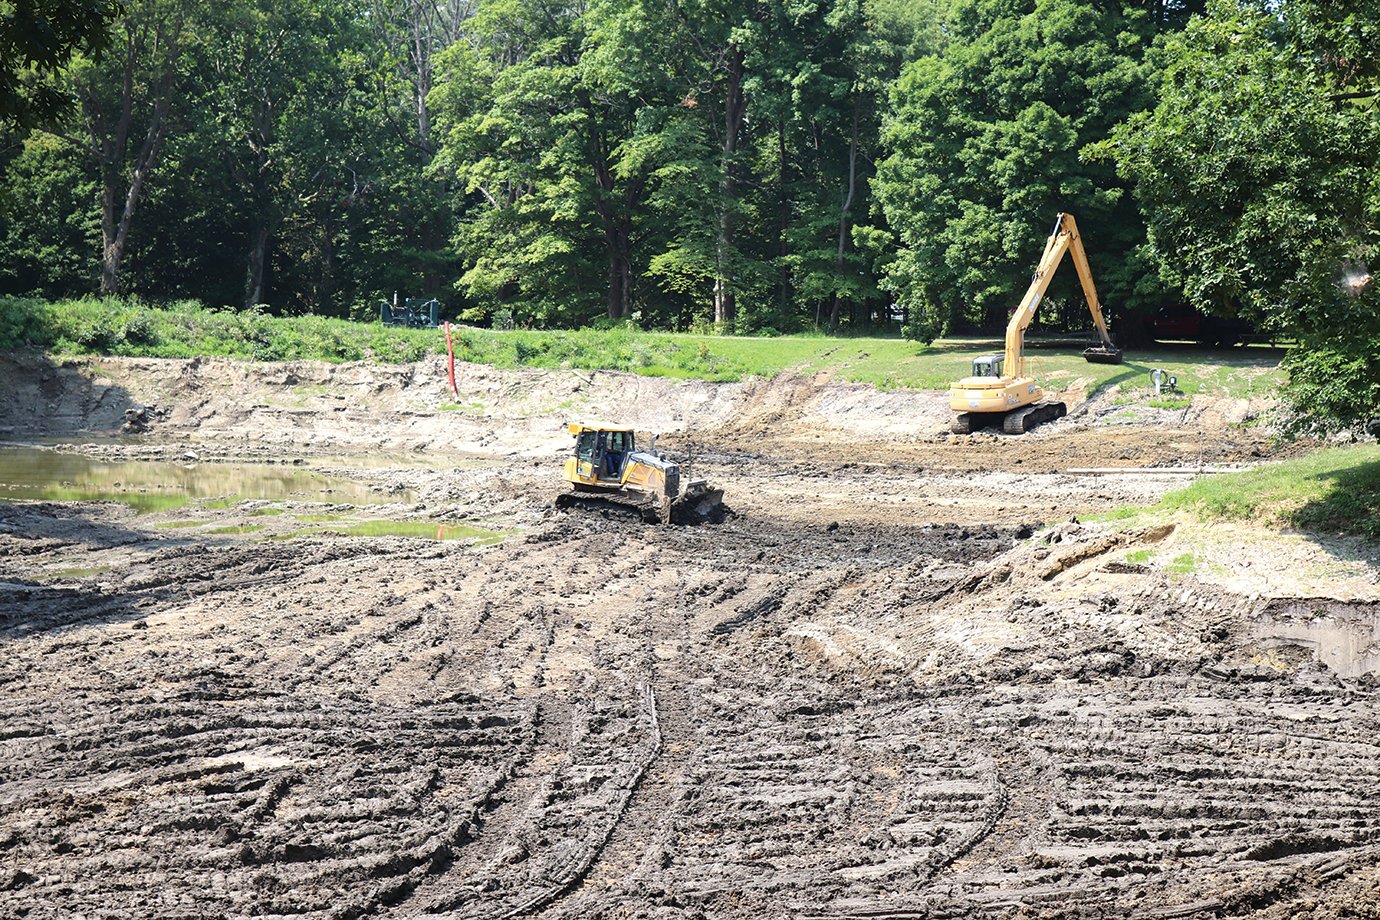 The Darlington Conservation Club pond, seen from a campsite on the property's east end, looks strange to those familiar with the property as crews work to improve the club premises.